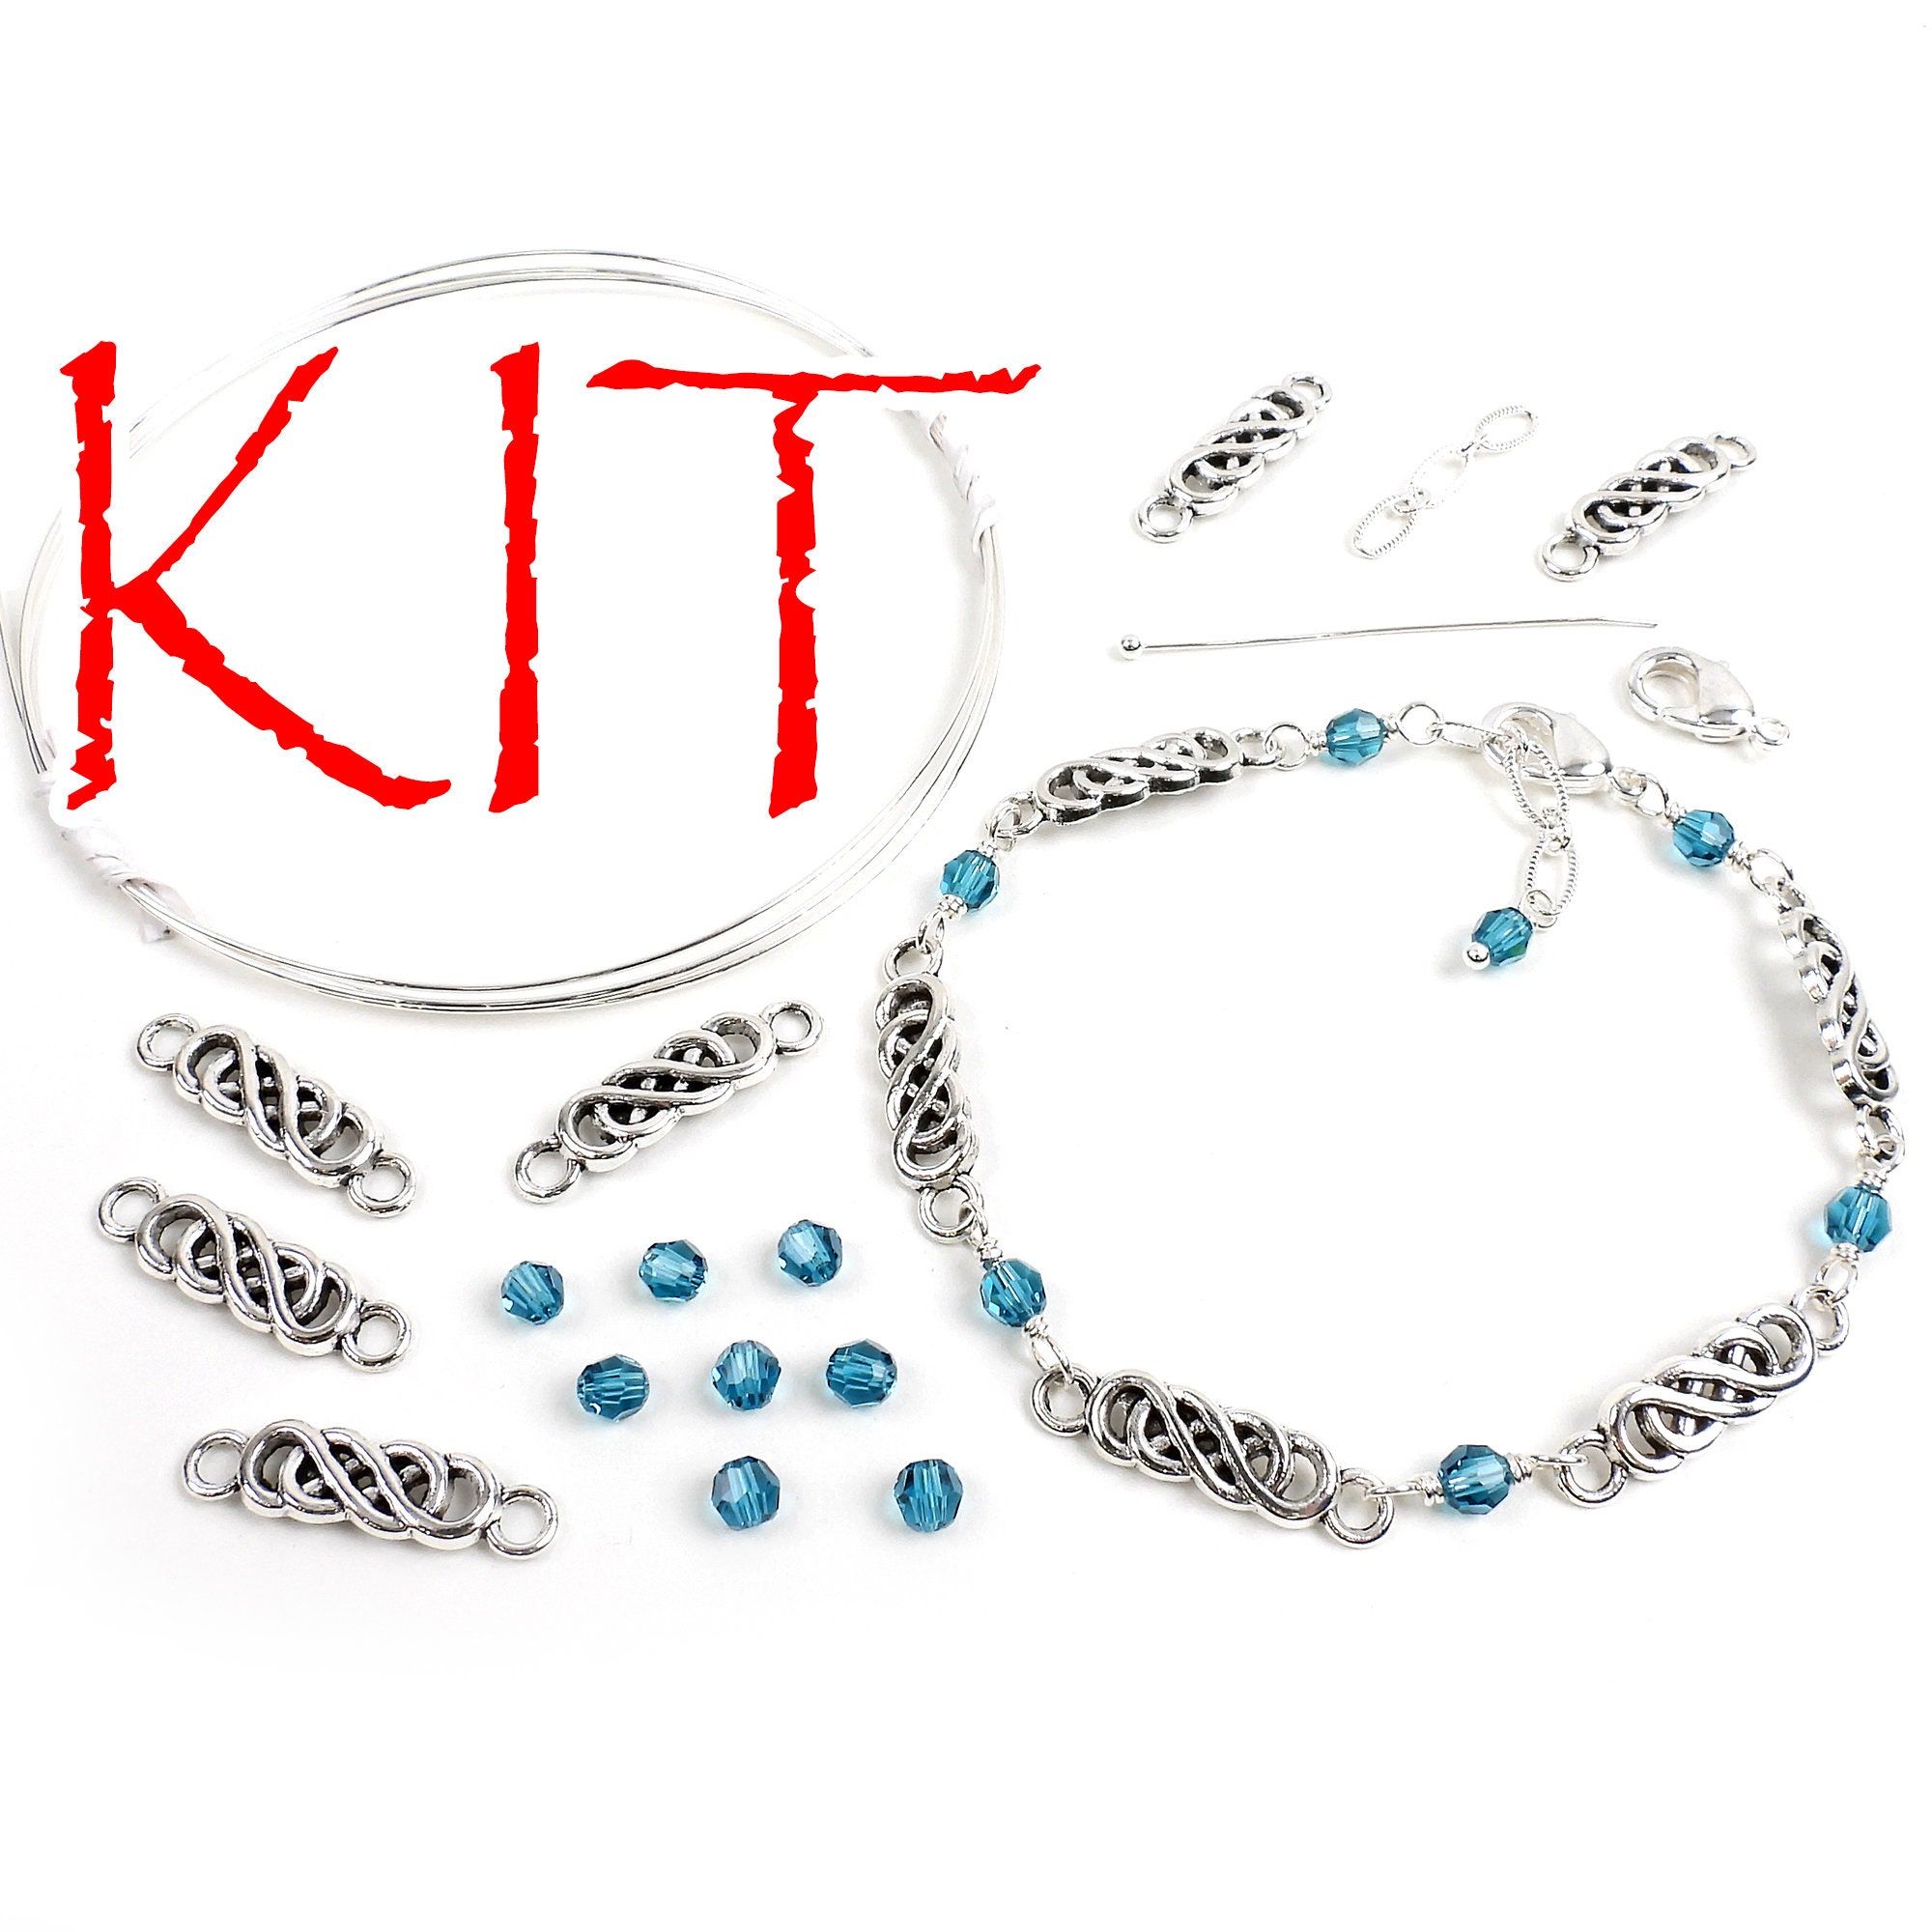 Jewelry Making Supplies Kit Jewelry Making Tools Kit Includes Beads Wire  for Bracelet and Pearl Beads Spacer Beads Jewelry Plier